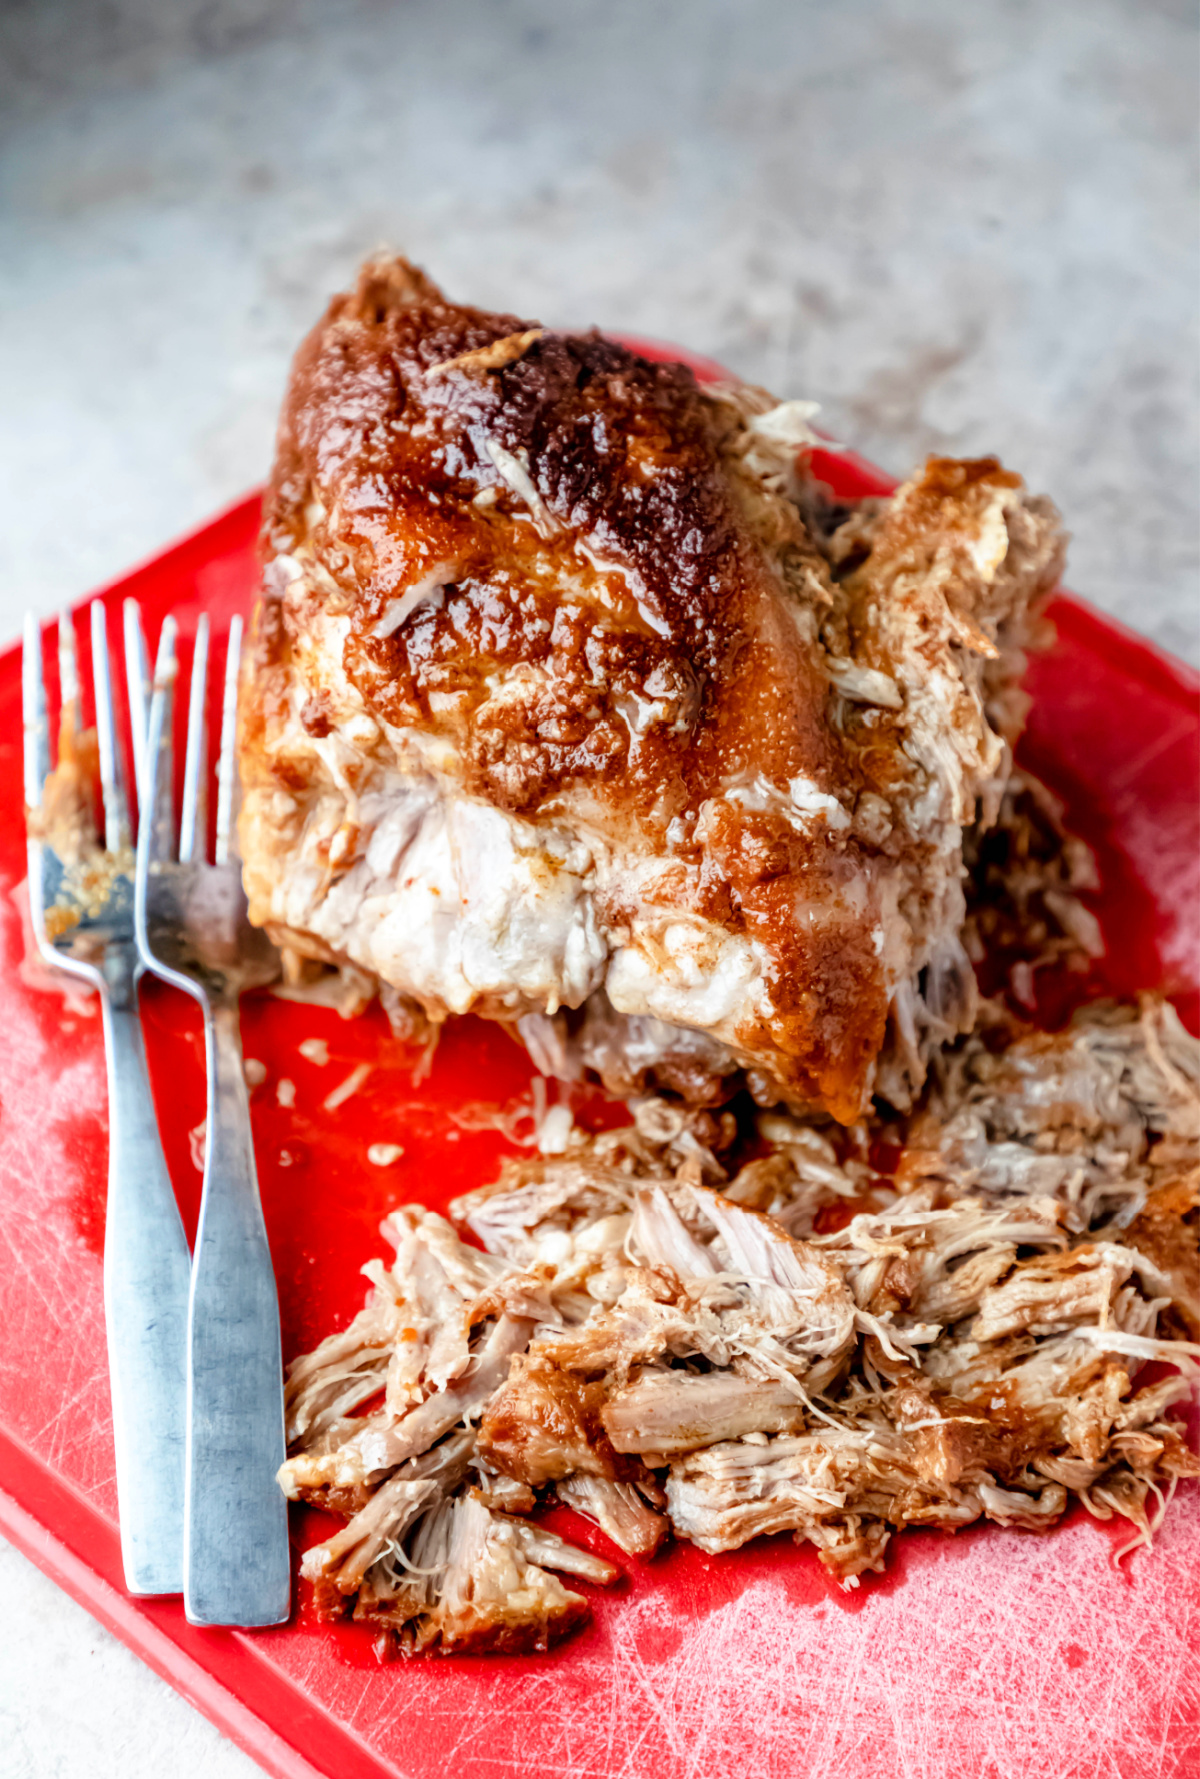 North Carolina style pulled pork on a red cutting board